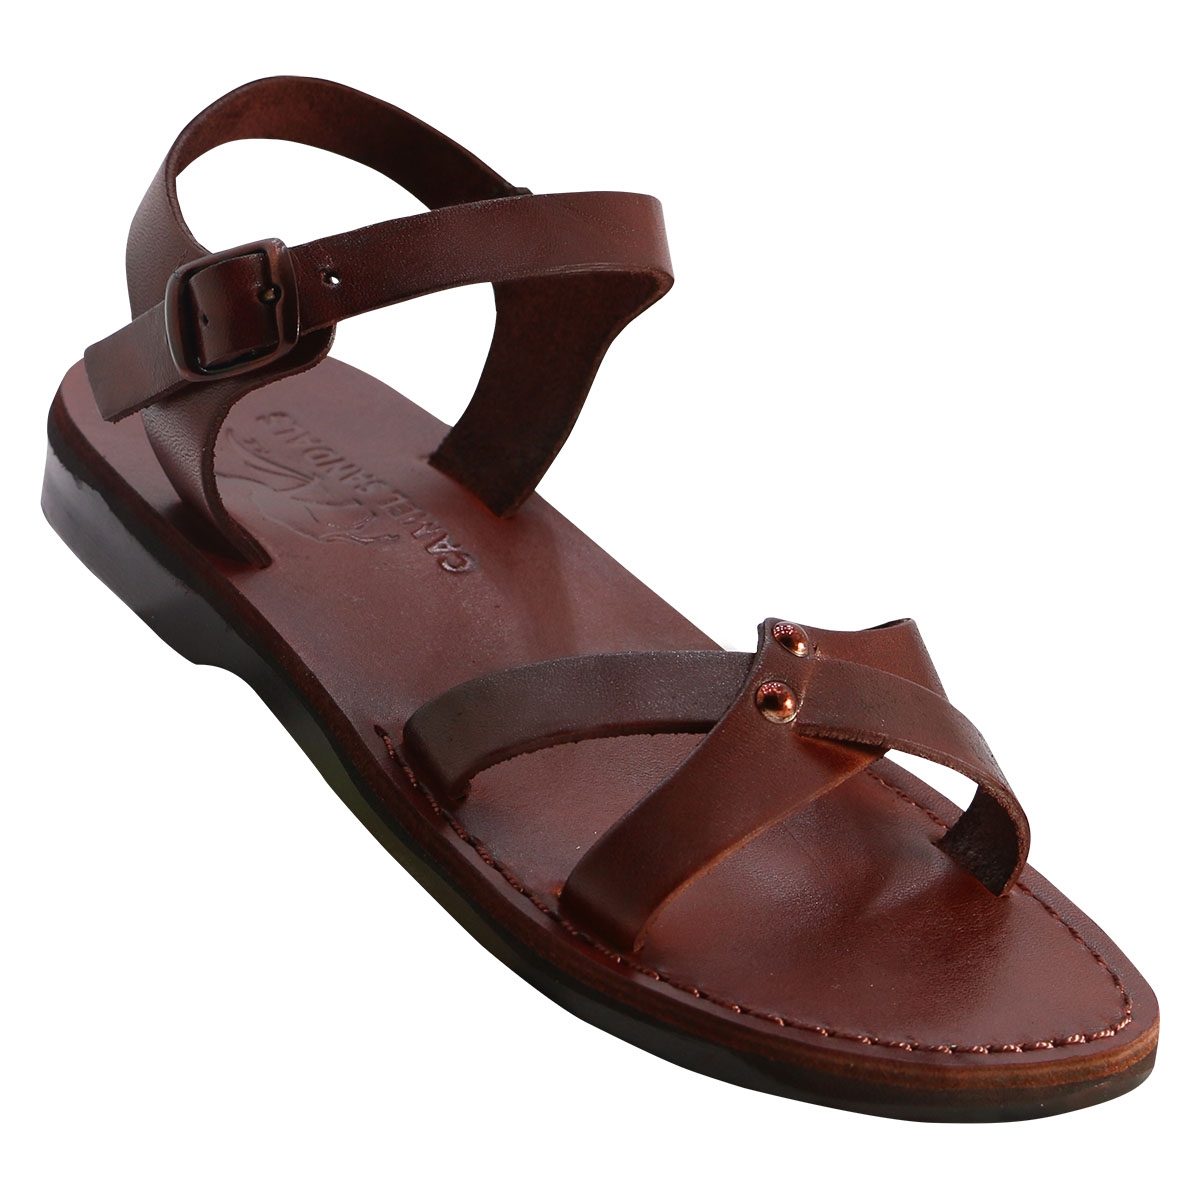 Amzi Handmade Leather Women's Sandals (Choice of Colors) - 1